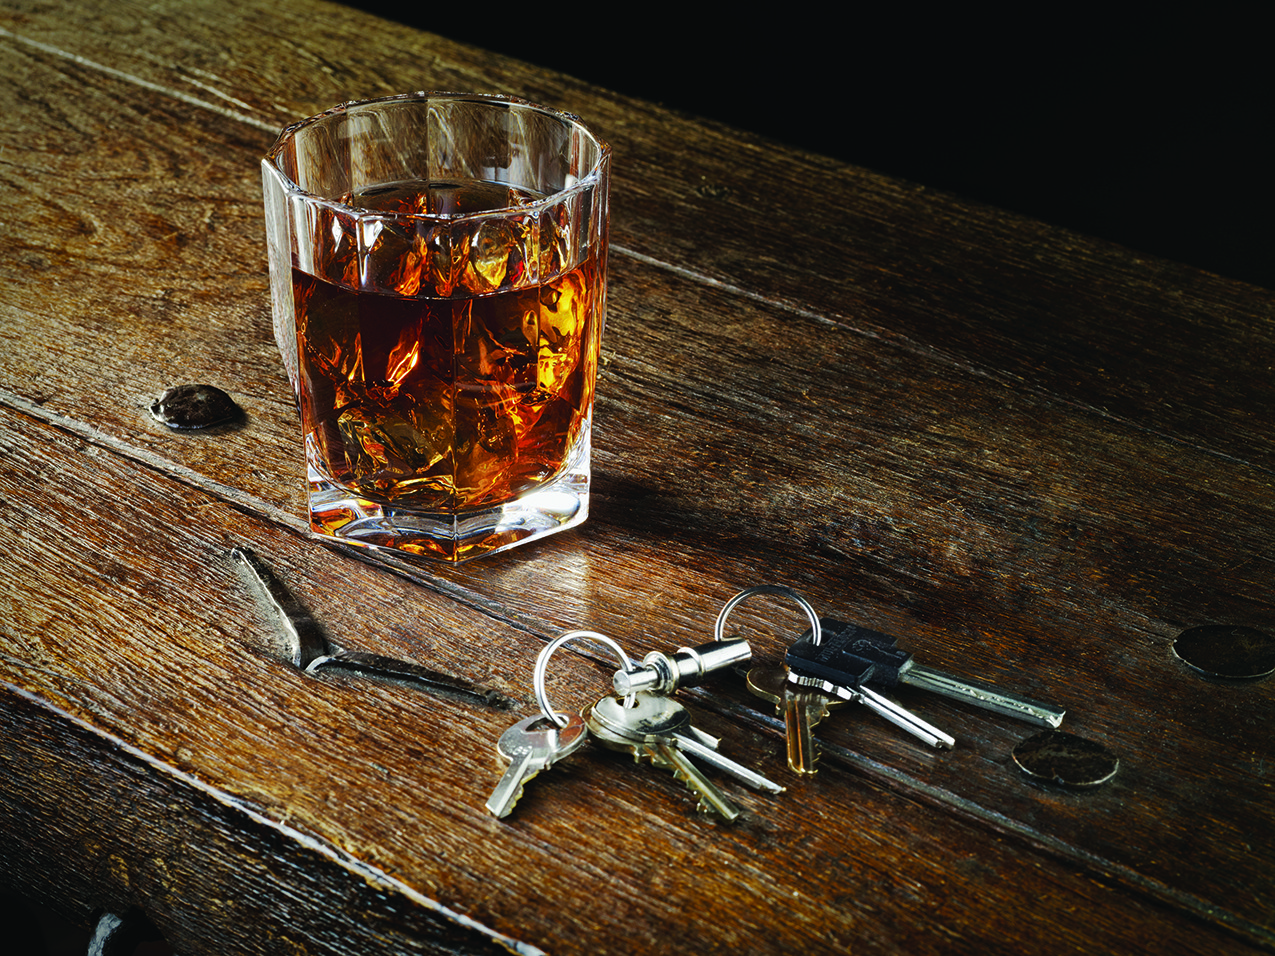 Enjoy holiday celebrations while also playing it safe from driving under the influence